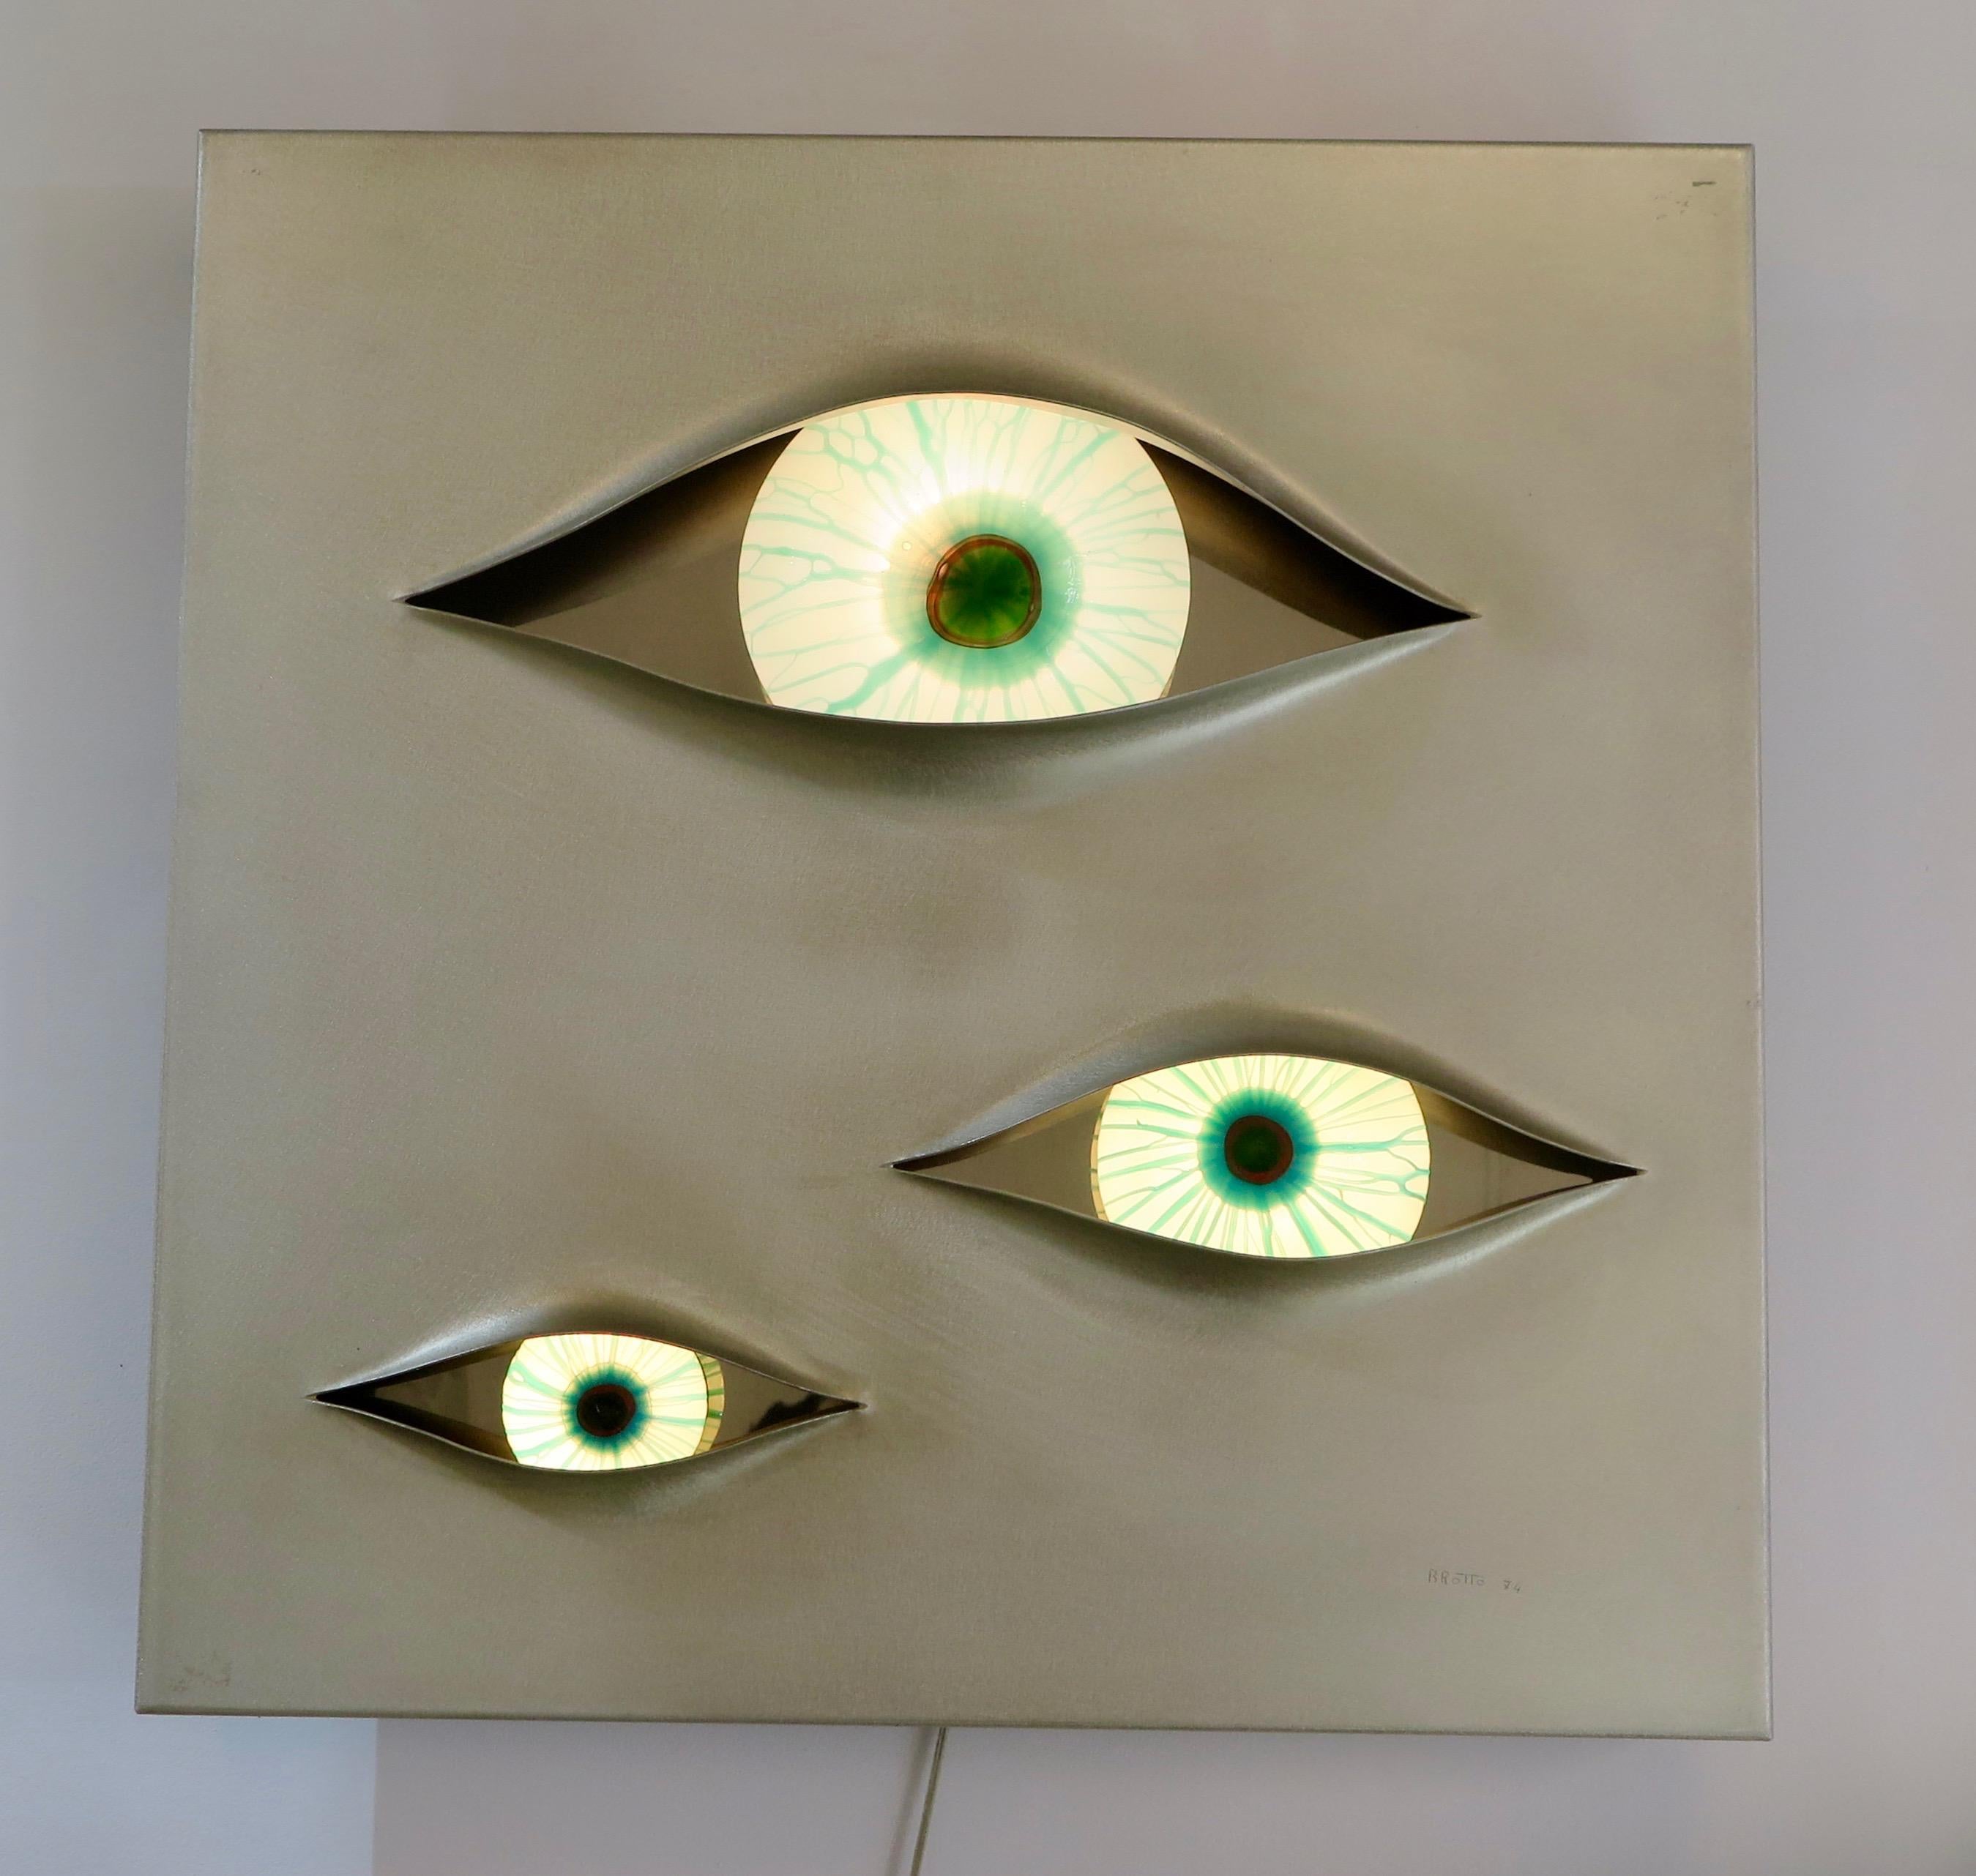 Illuminated wall light panel in brushed stainless steel and 3 eyes in painted 